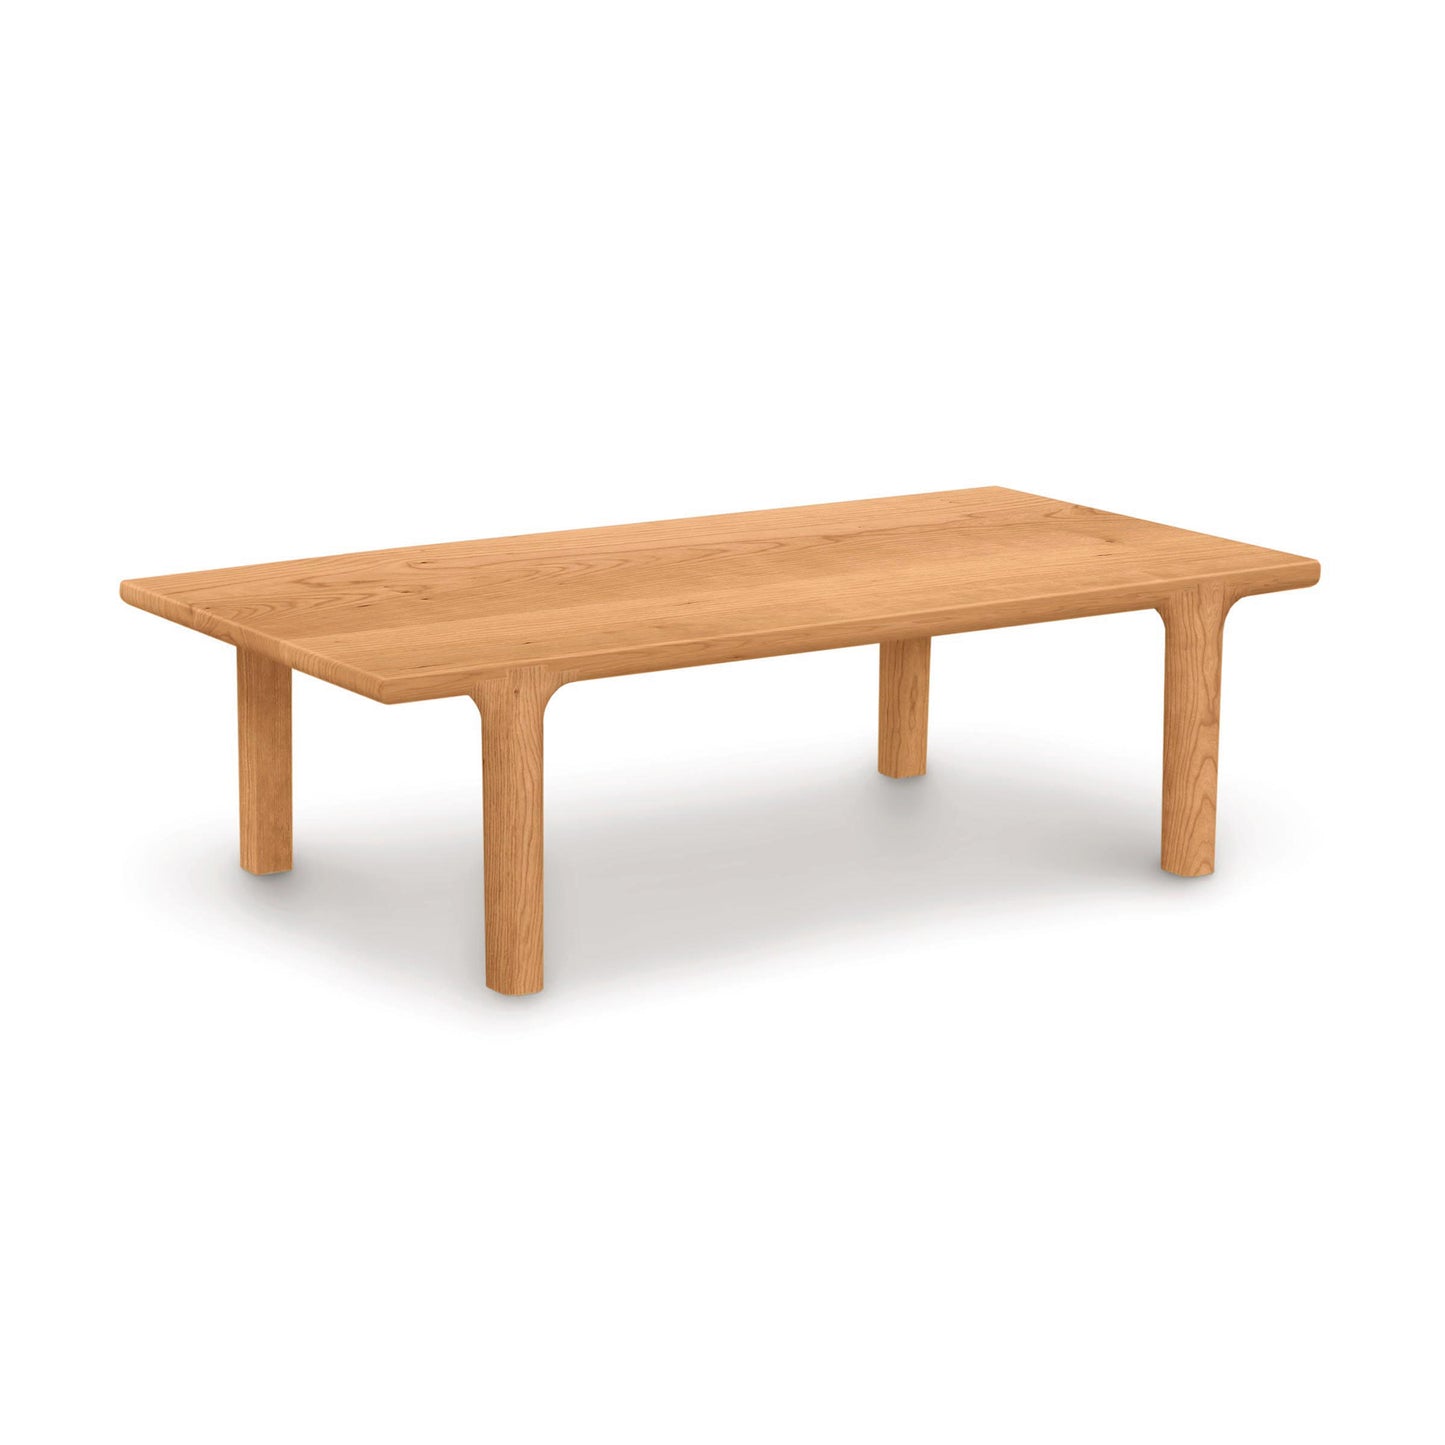 A simple Copeland Furniture Sierra Rectangular Coffee Table made from solid North American hardwood with four legs on a white background.